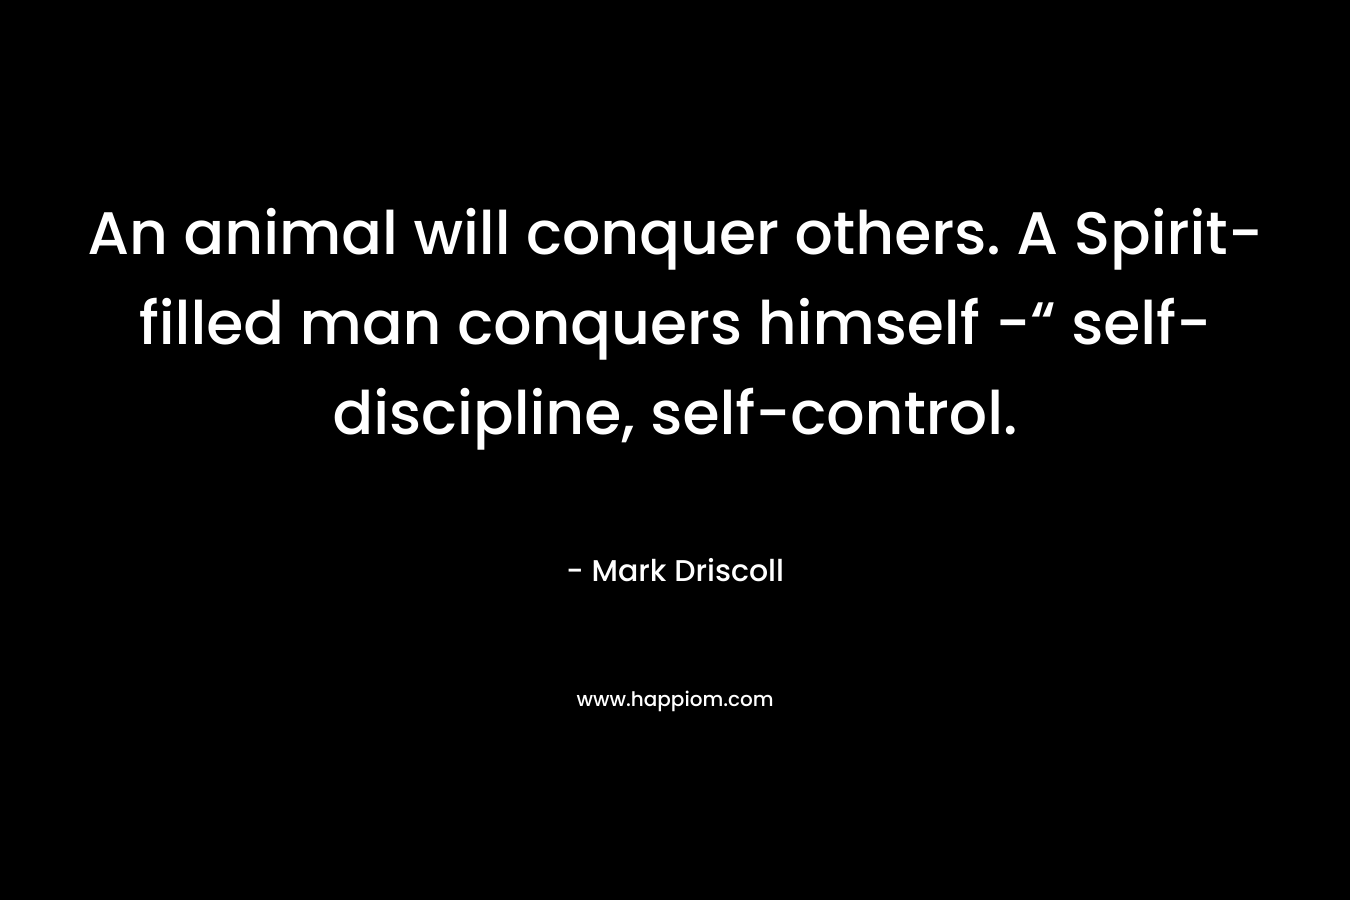 An animal will conquer others. A Spirit-filled man conquers himself -“ self-discipline, self-control. – Mark Driscoll